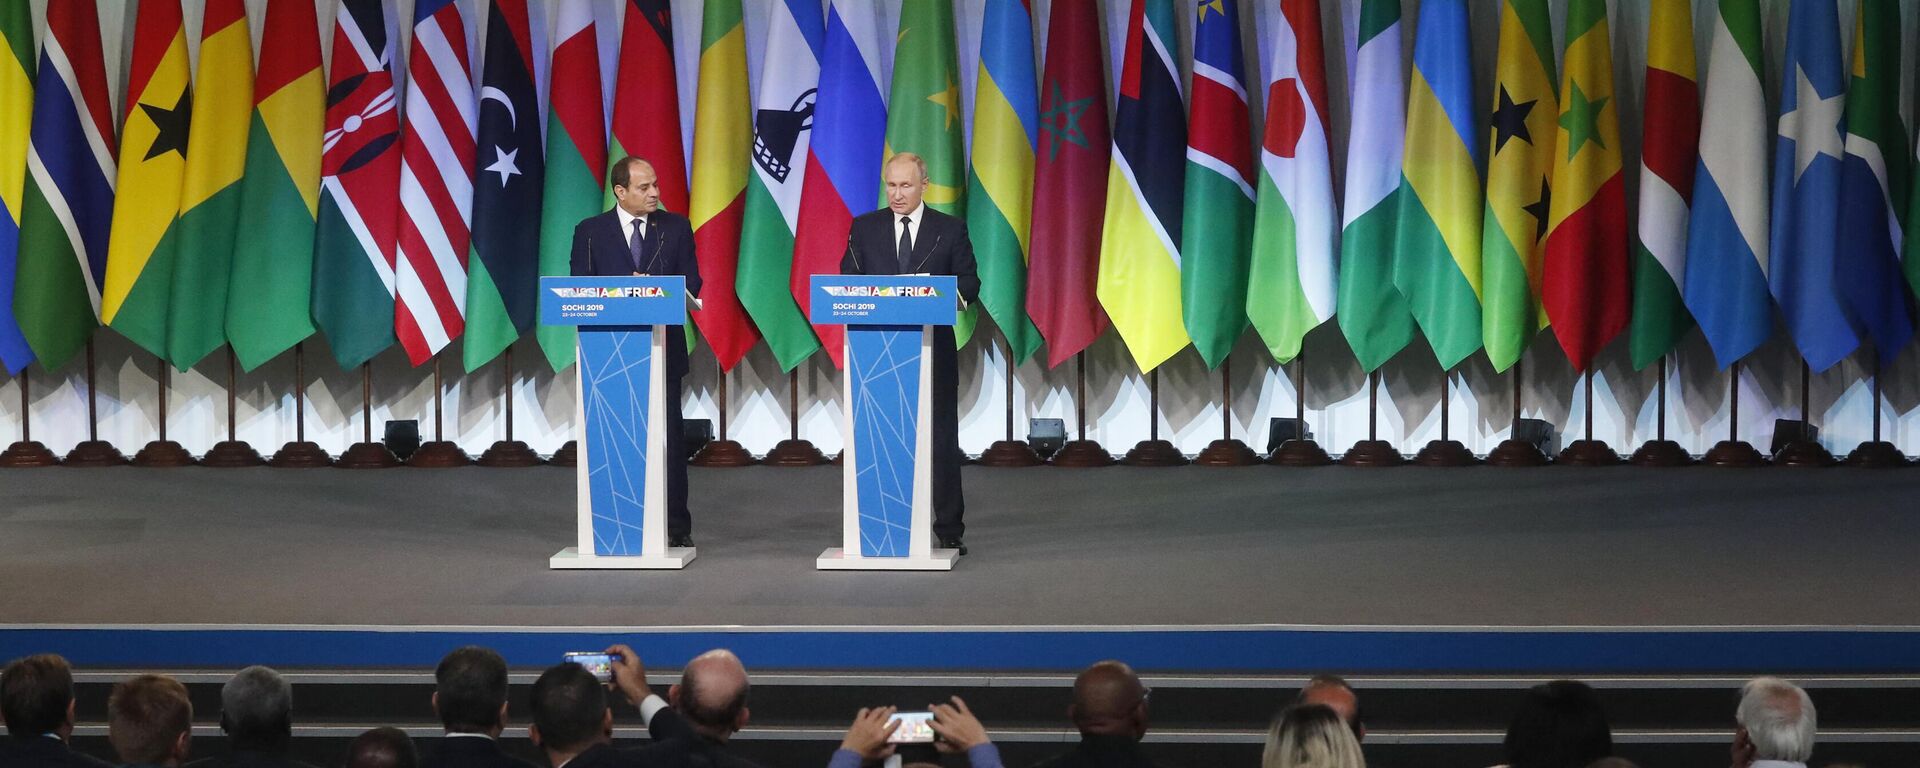 Russia's President Vladimir Putin and Egypt's President Abdel Fattah al-Sisi make a press statement following the 2019 Russia-Africa Summit at the Sirius Park of Science and Art in Sochi, Russia, on October 24, 2019. - Sputnik International, 1920, 01.12.2022